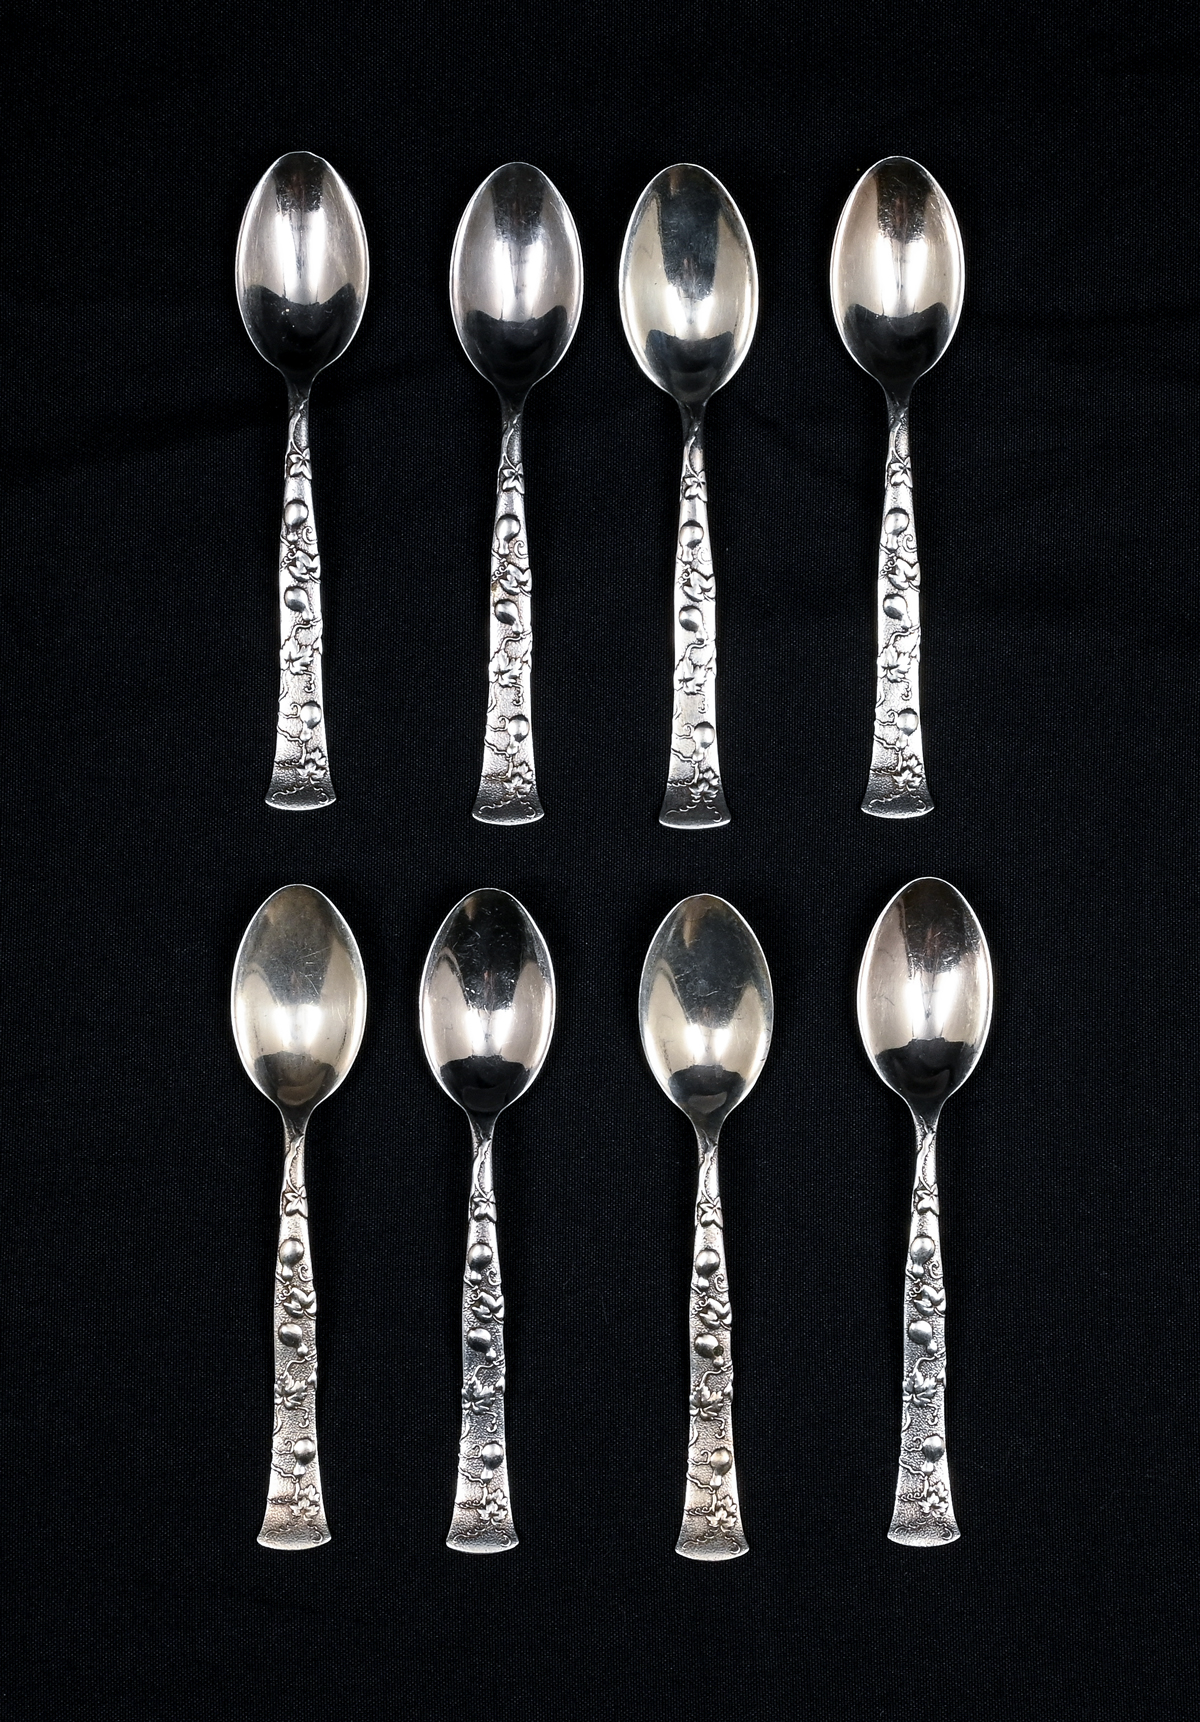 8 PC. TIFFANY STERLING SILVER SPOONS: